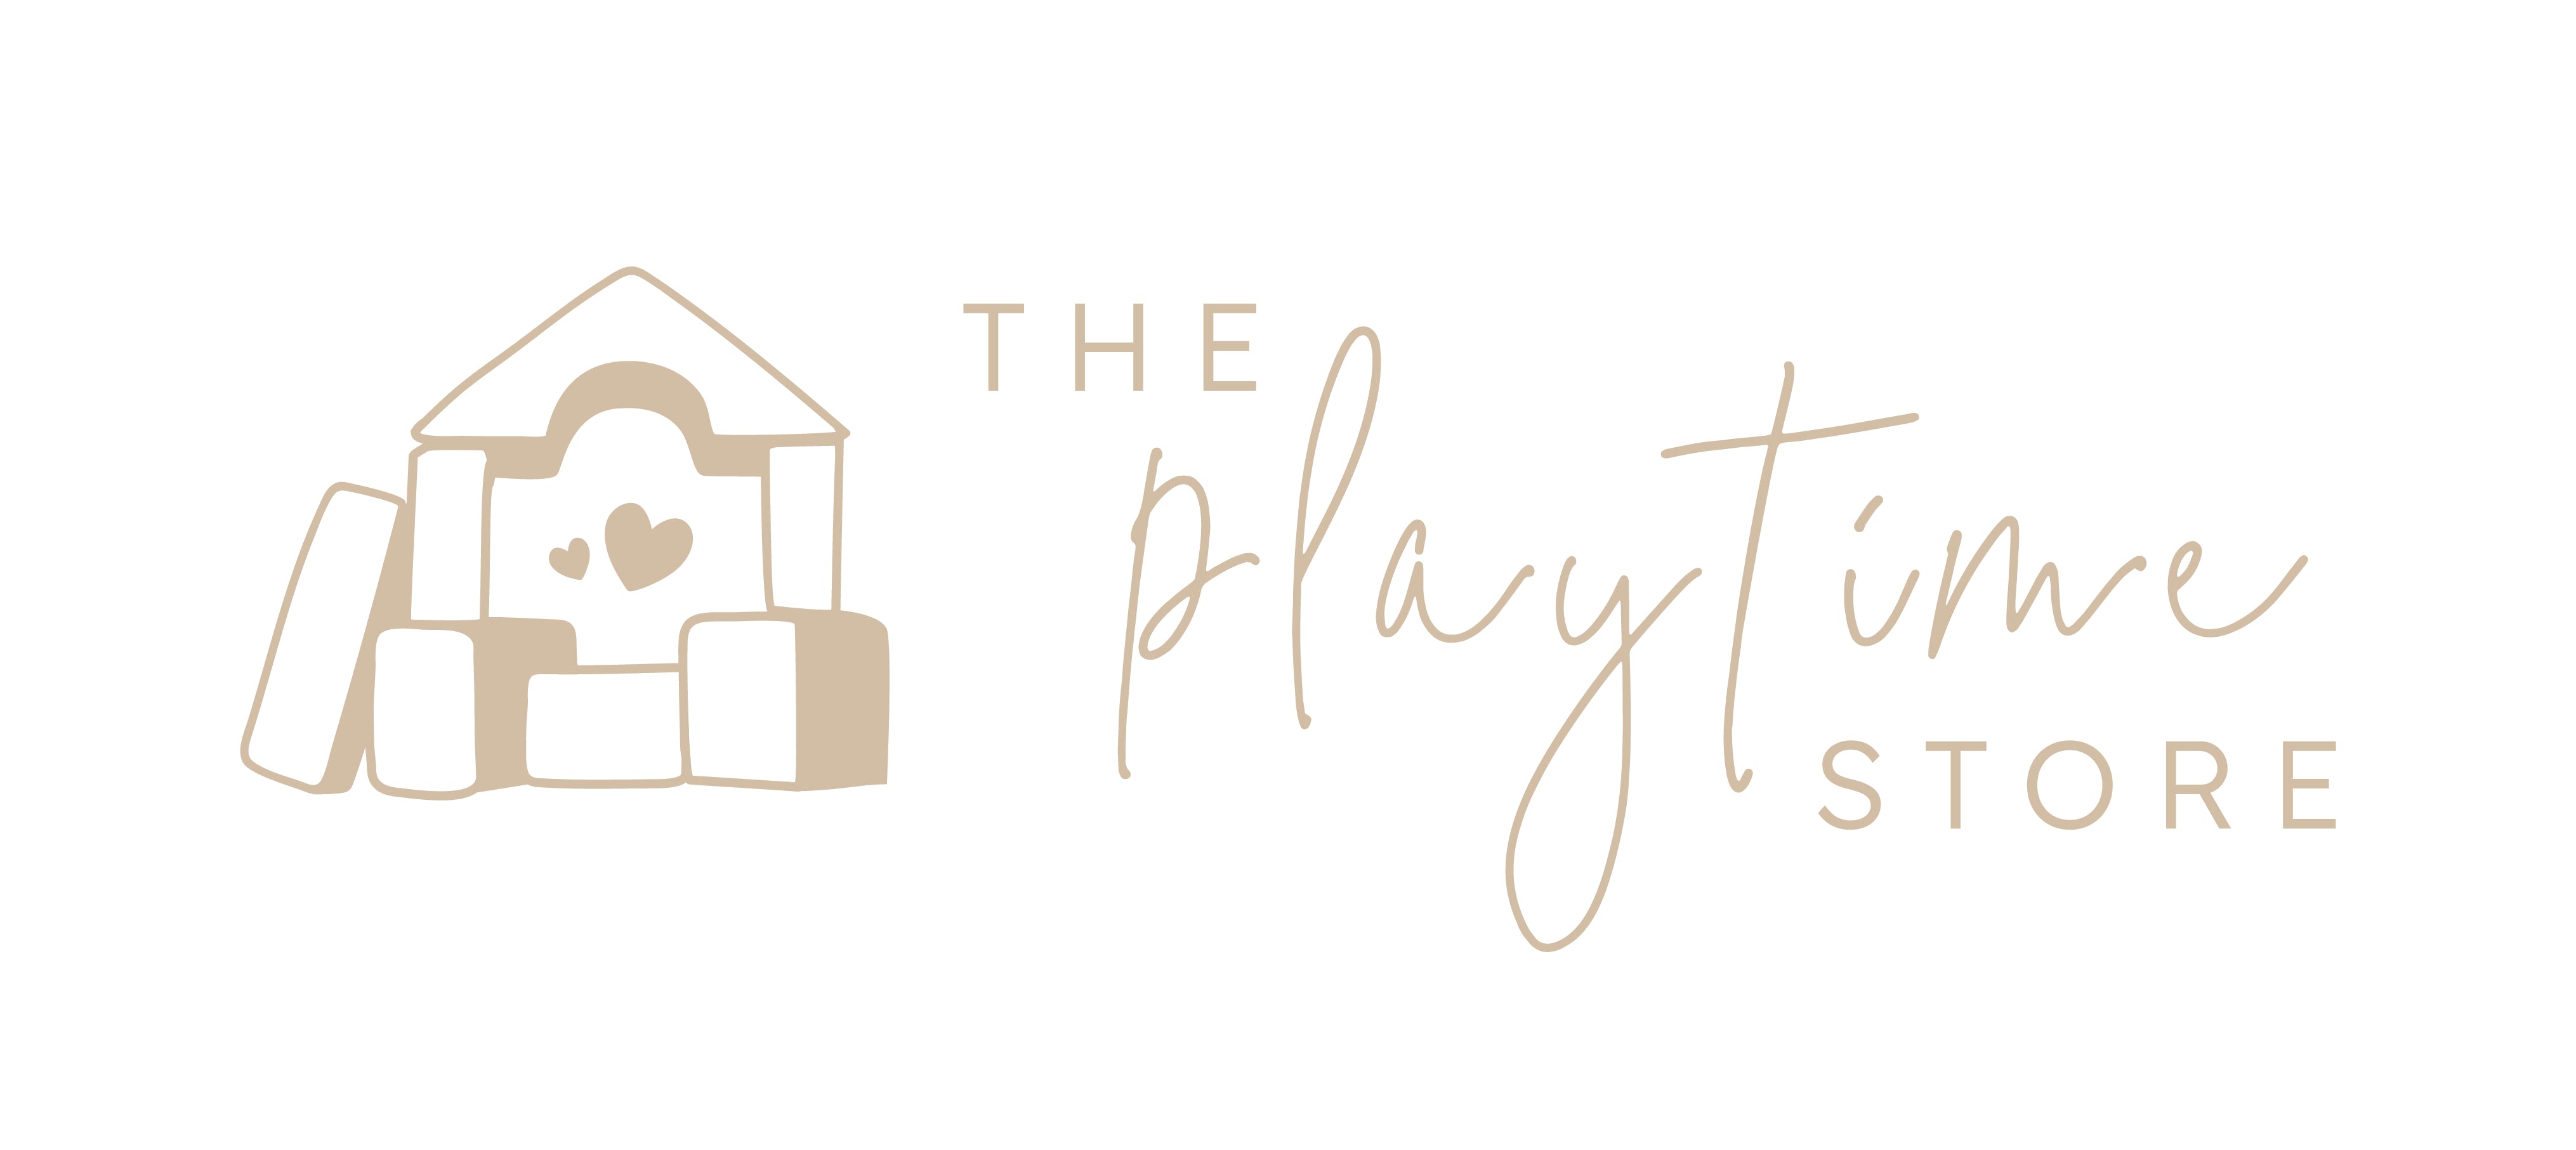 The Playtime Store